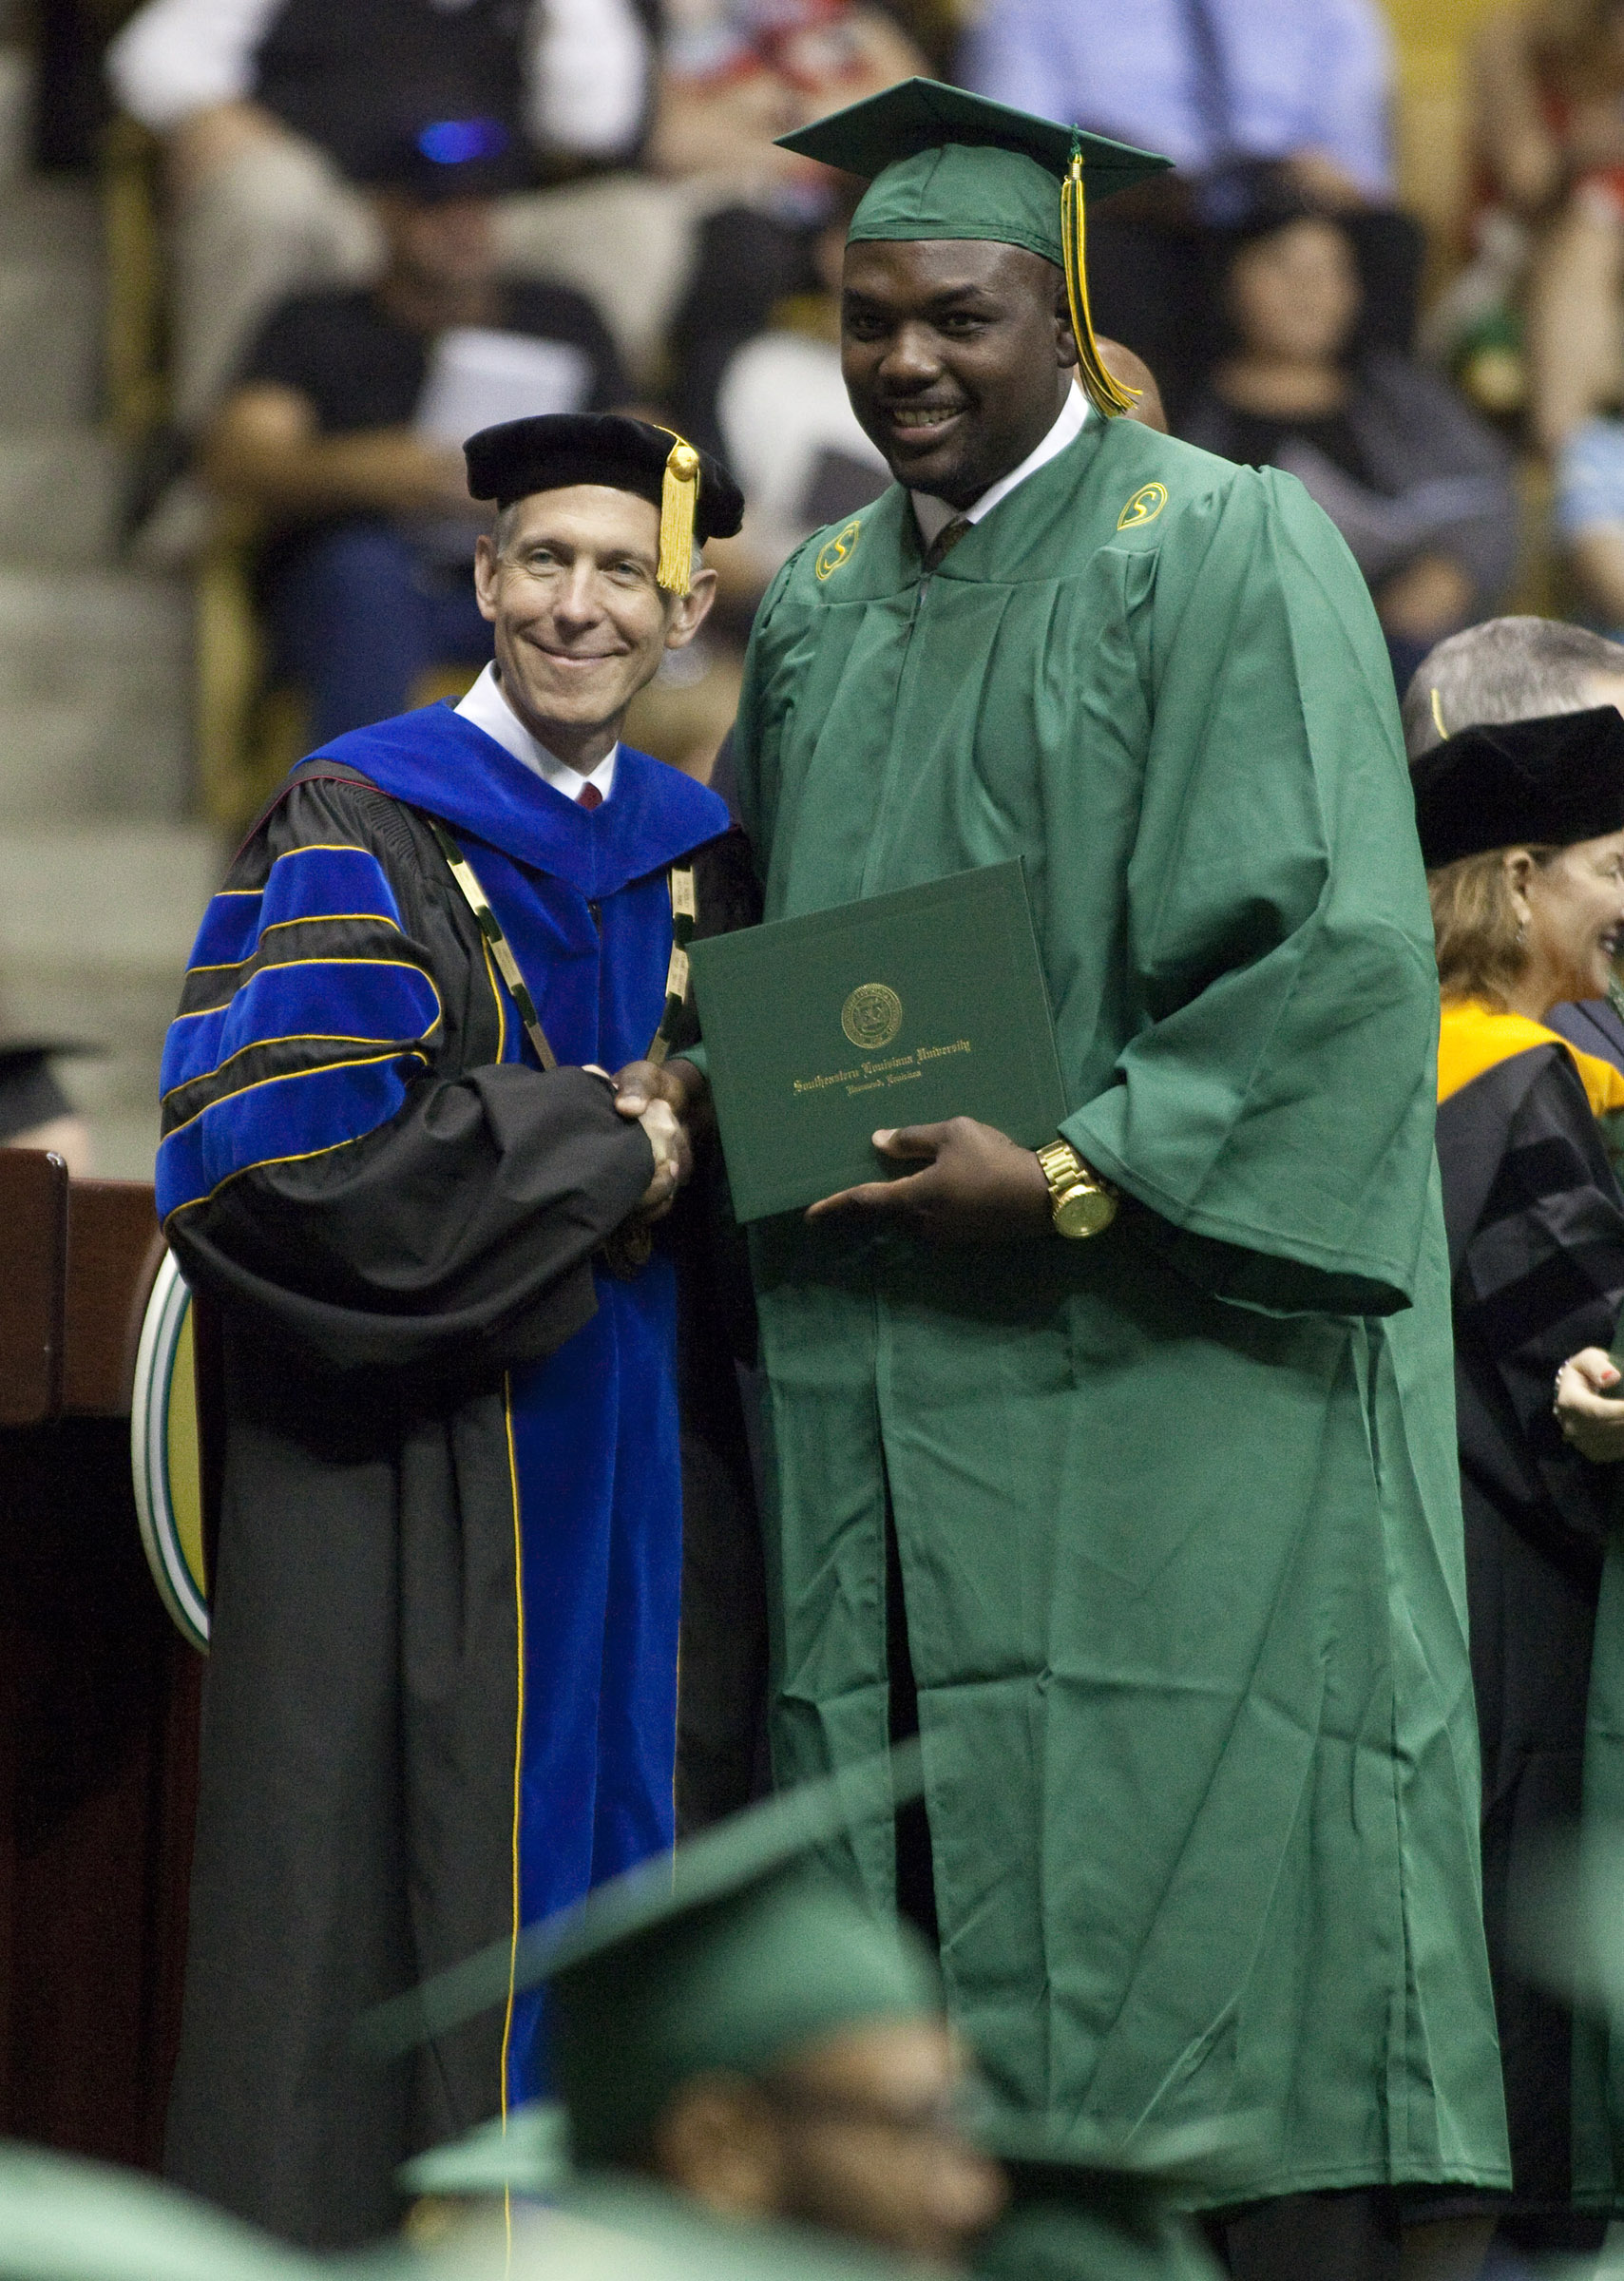 Southeastern confers degrees on more than 1,000